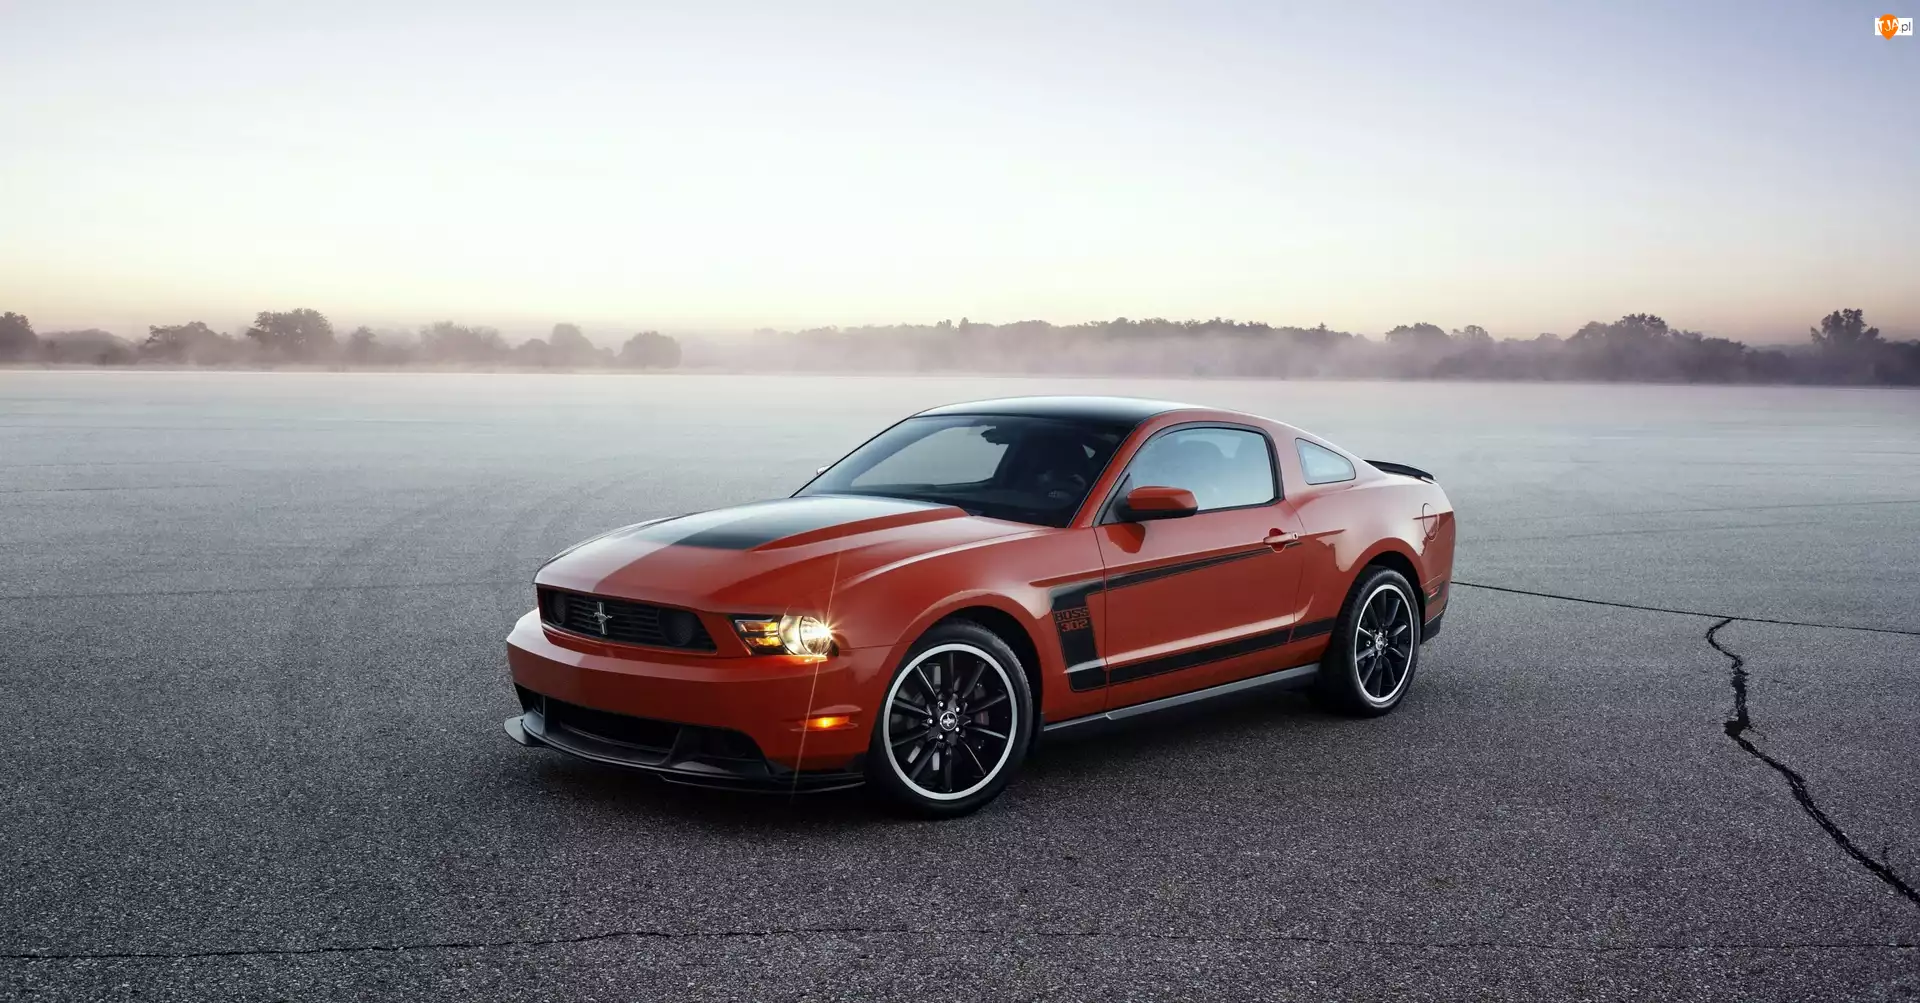 2012, Ford Mustang Boss 302